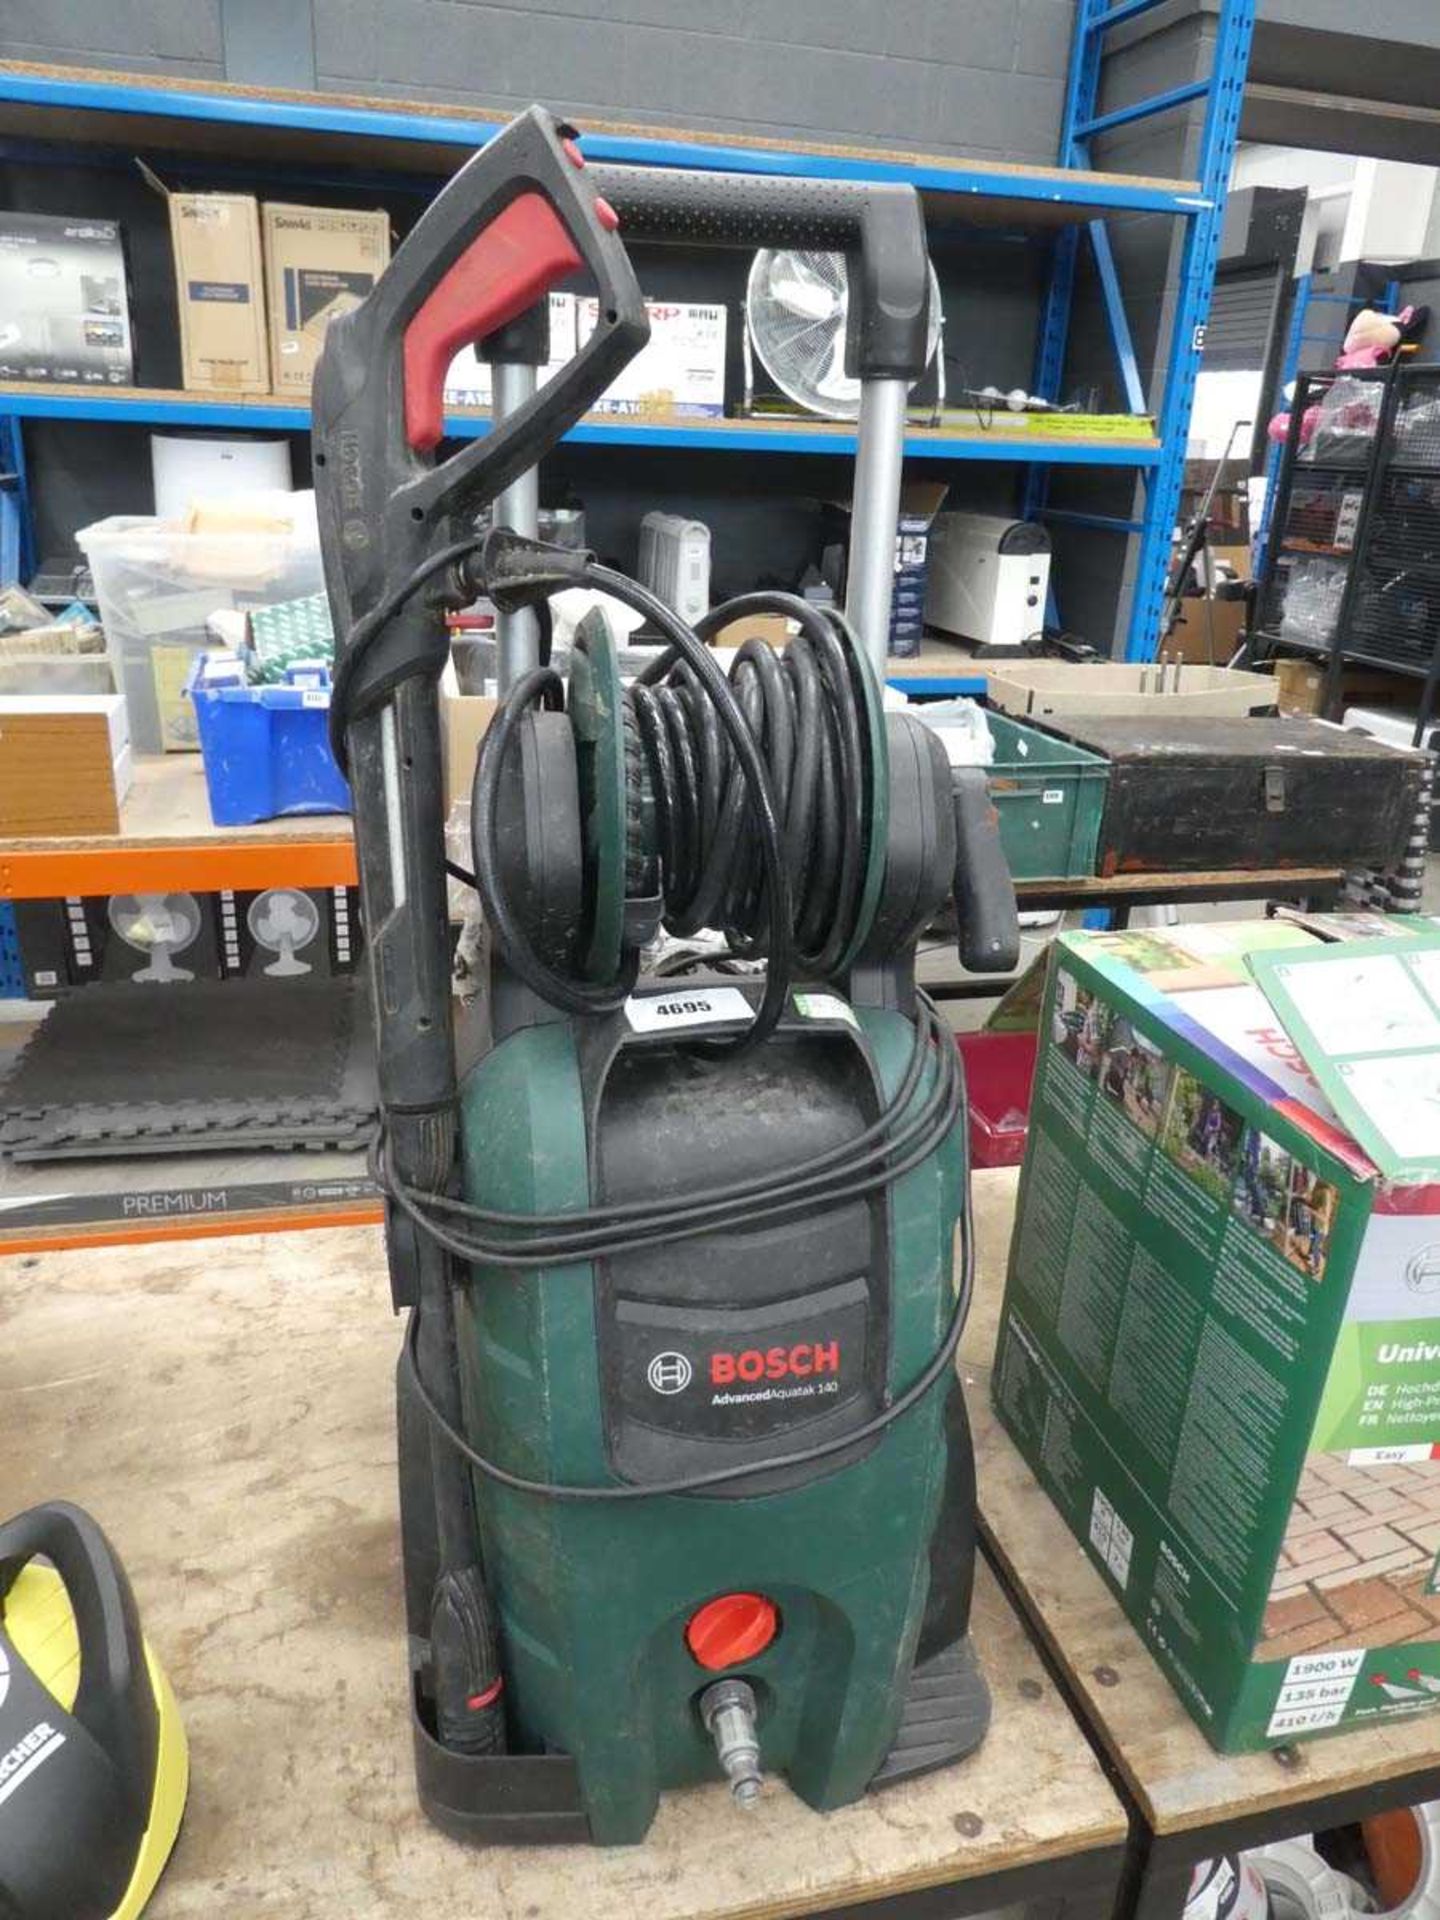 +VAT Bosch Advance Aquatak 140 electric pressure washer with patio cleaning head